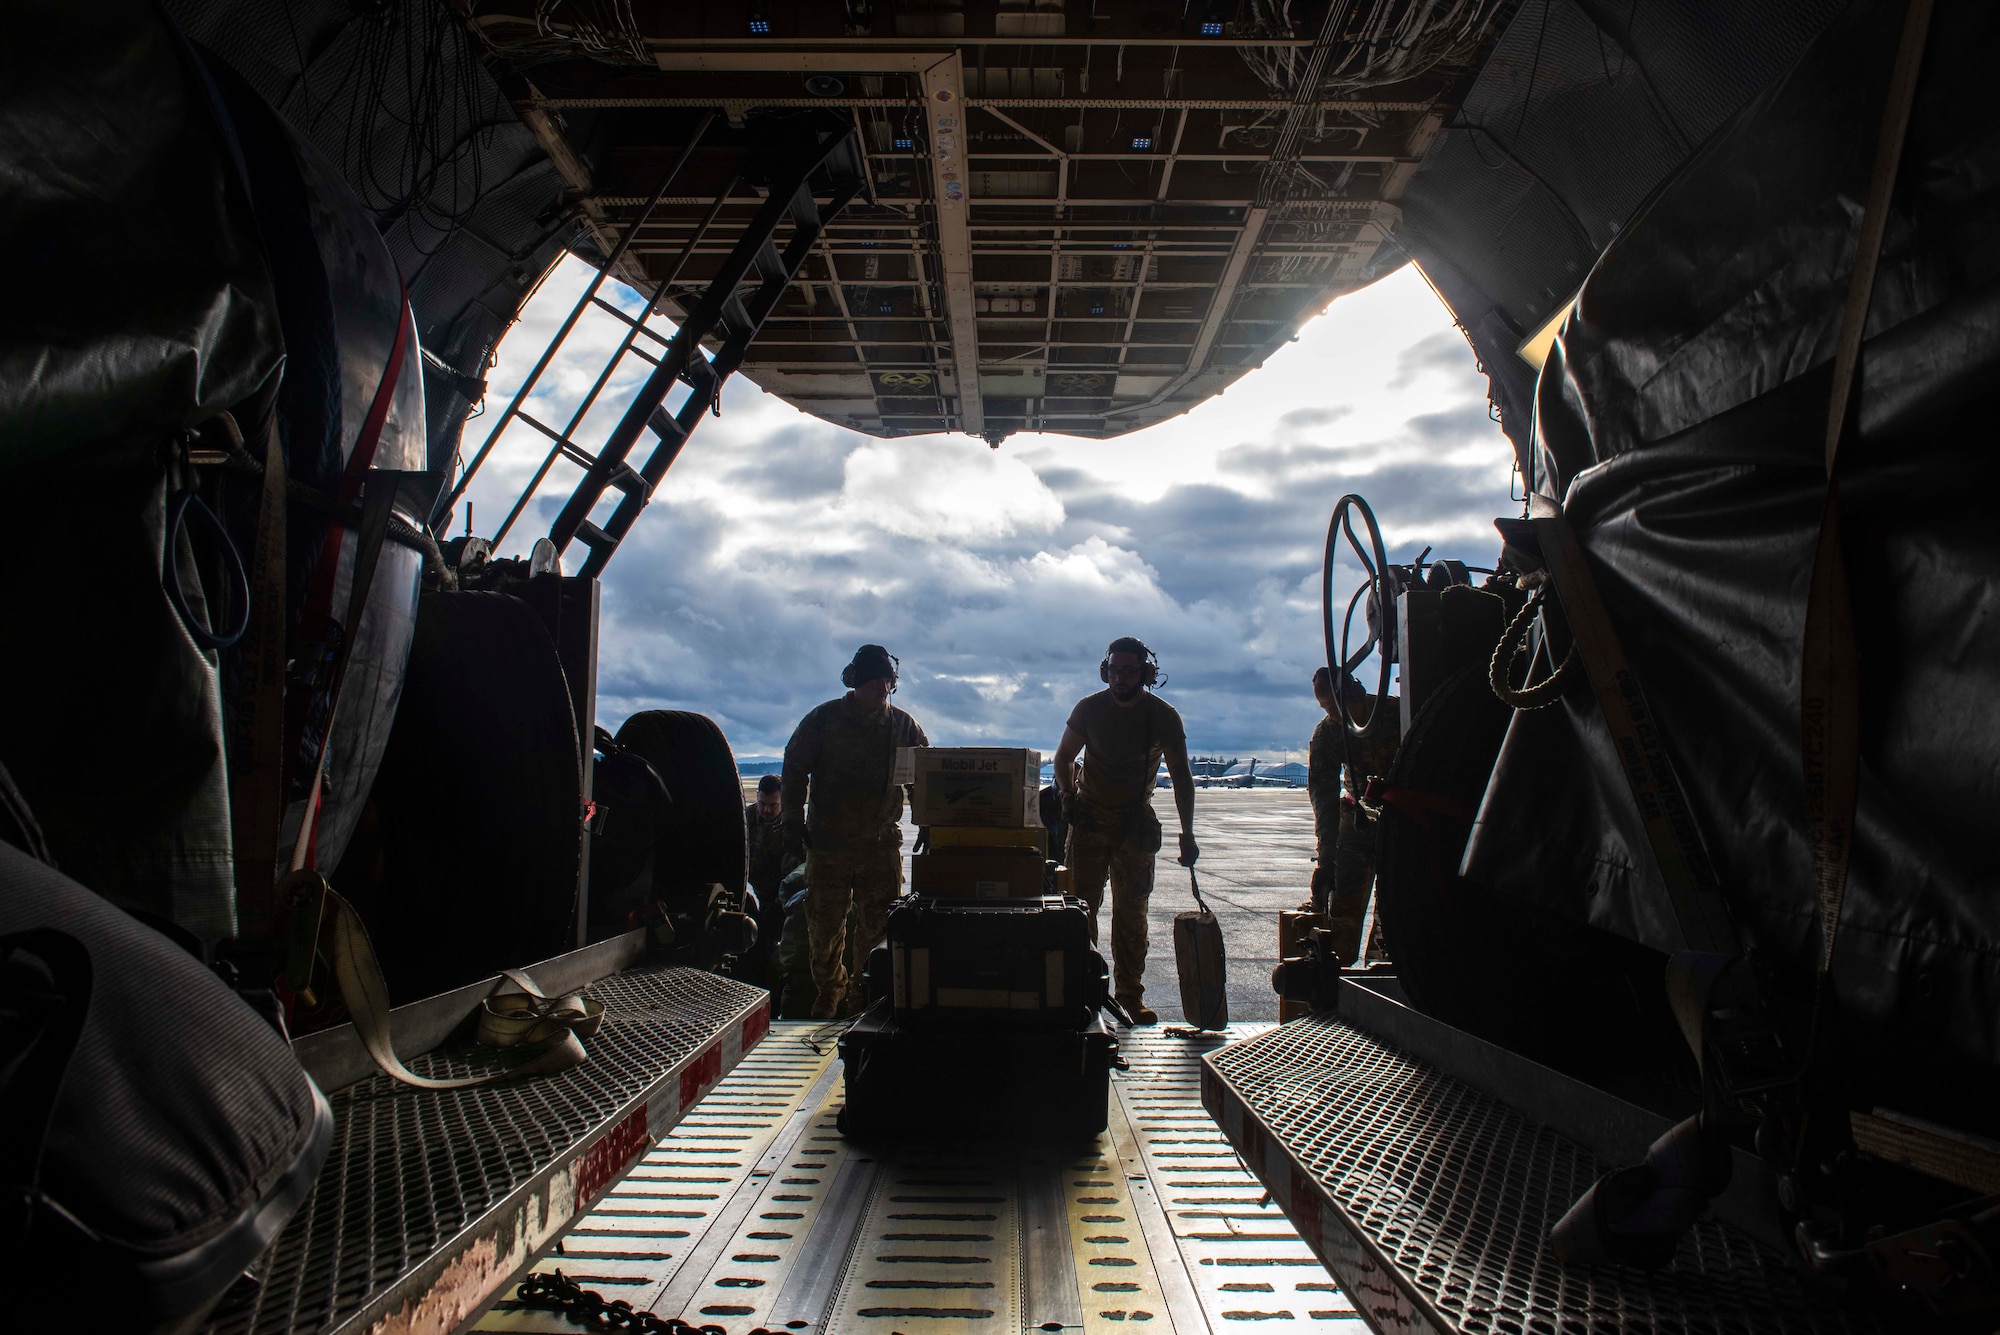 U.S. Air Force Airmen and Navy Sailors load mini submersibles and cargo inside a C-5M Super Galaxy at Joint Base Lewis-McChord, Wash., Dec. 8, 2023. The joint operation consisted of loading cargo and mini submersibles on the aircraft and was conducted by service members from Travis Air Force Base, Calif., Joint Base Pearl Harbor-Hickam, Hawaii, and JBLM. (U.S. Air Force photo by Airman 1st Class Megan Geiger)